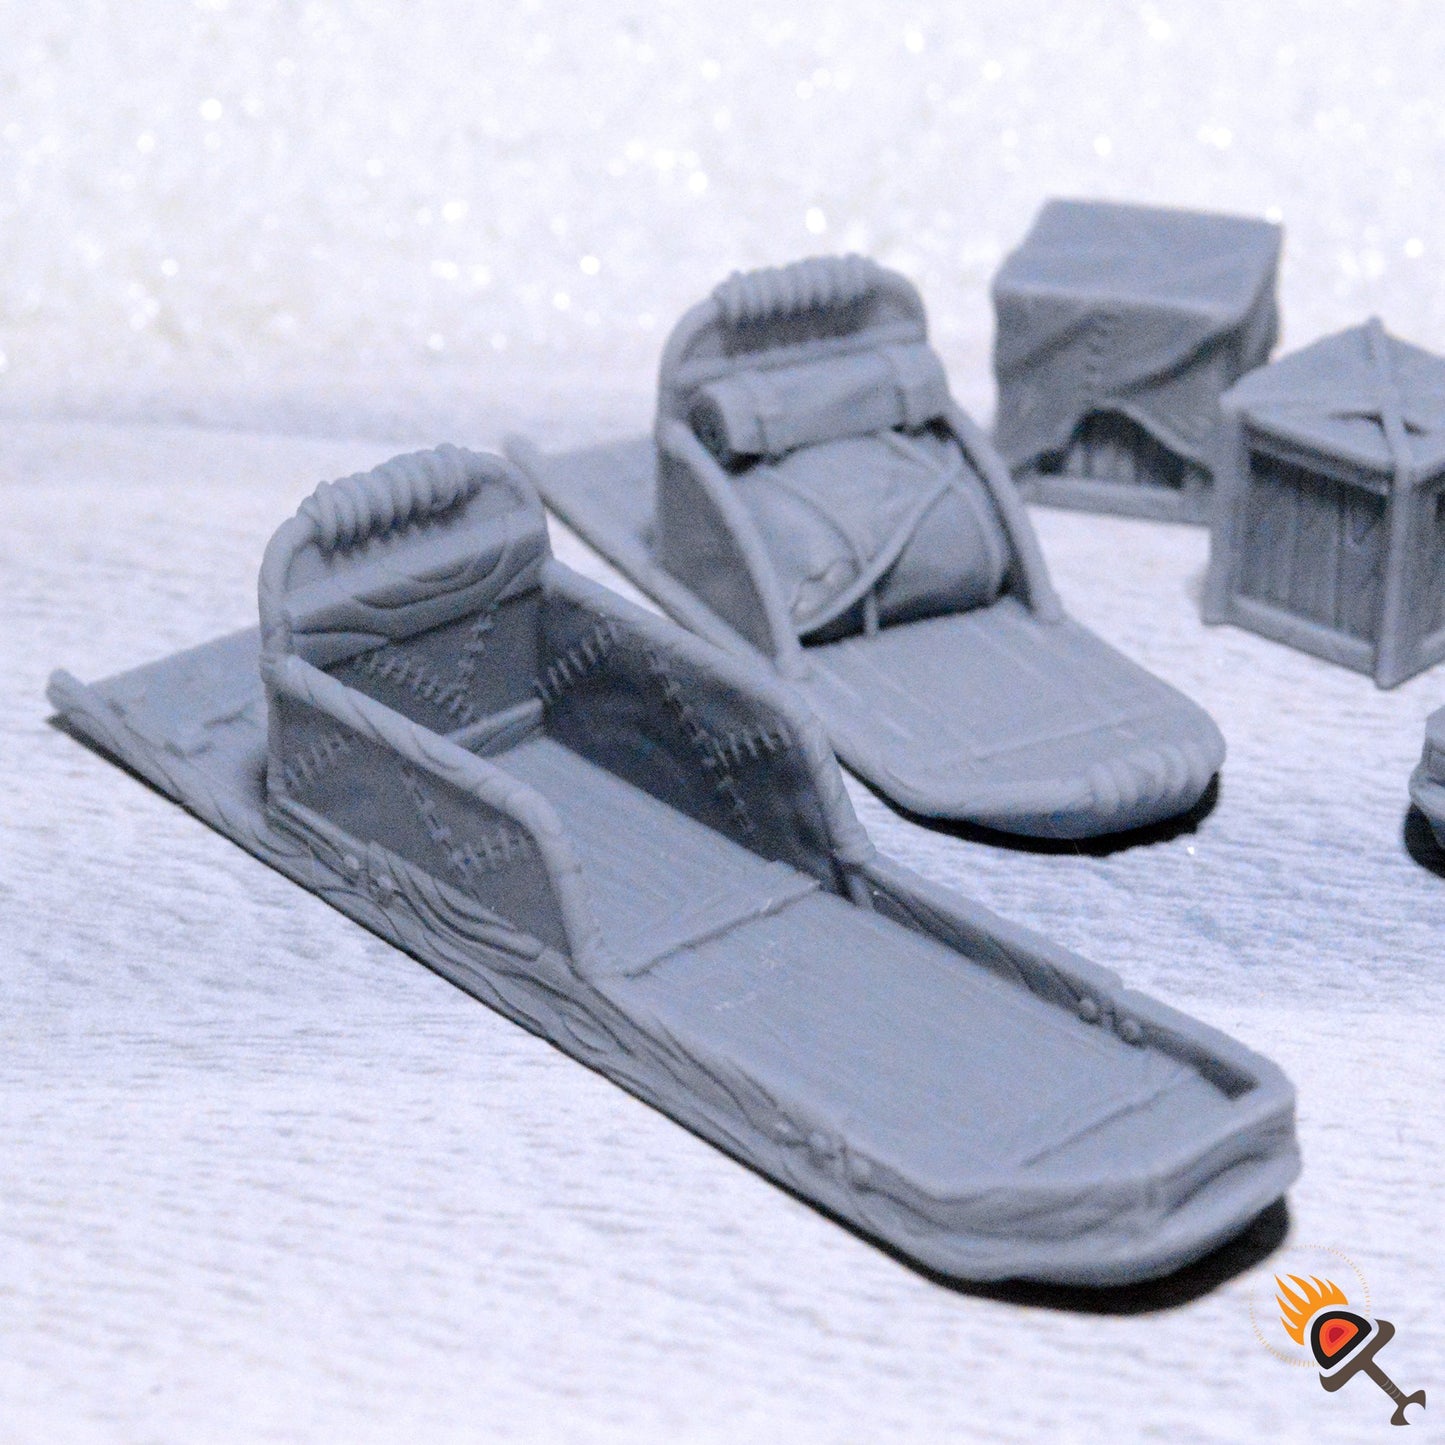 Miniature Dog Sleds and Cargo 15mm 28mm 32mm for D&D Icewind Dale Terrain, DnD Pathfinder Arctic Snowy Icy